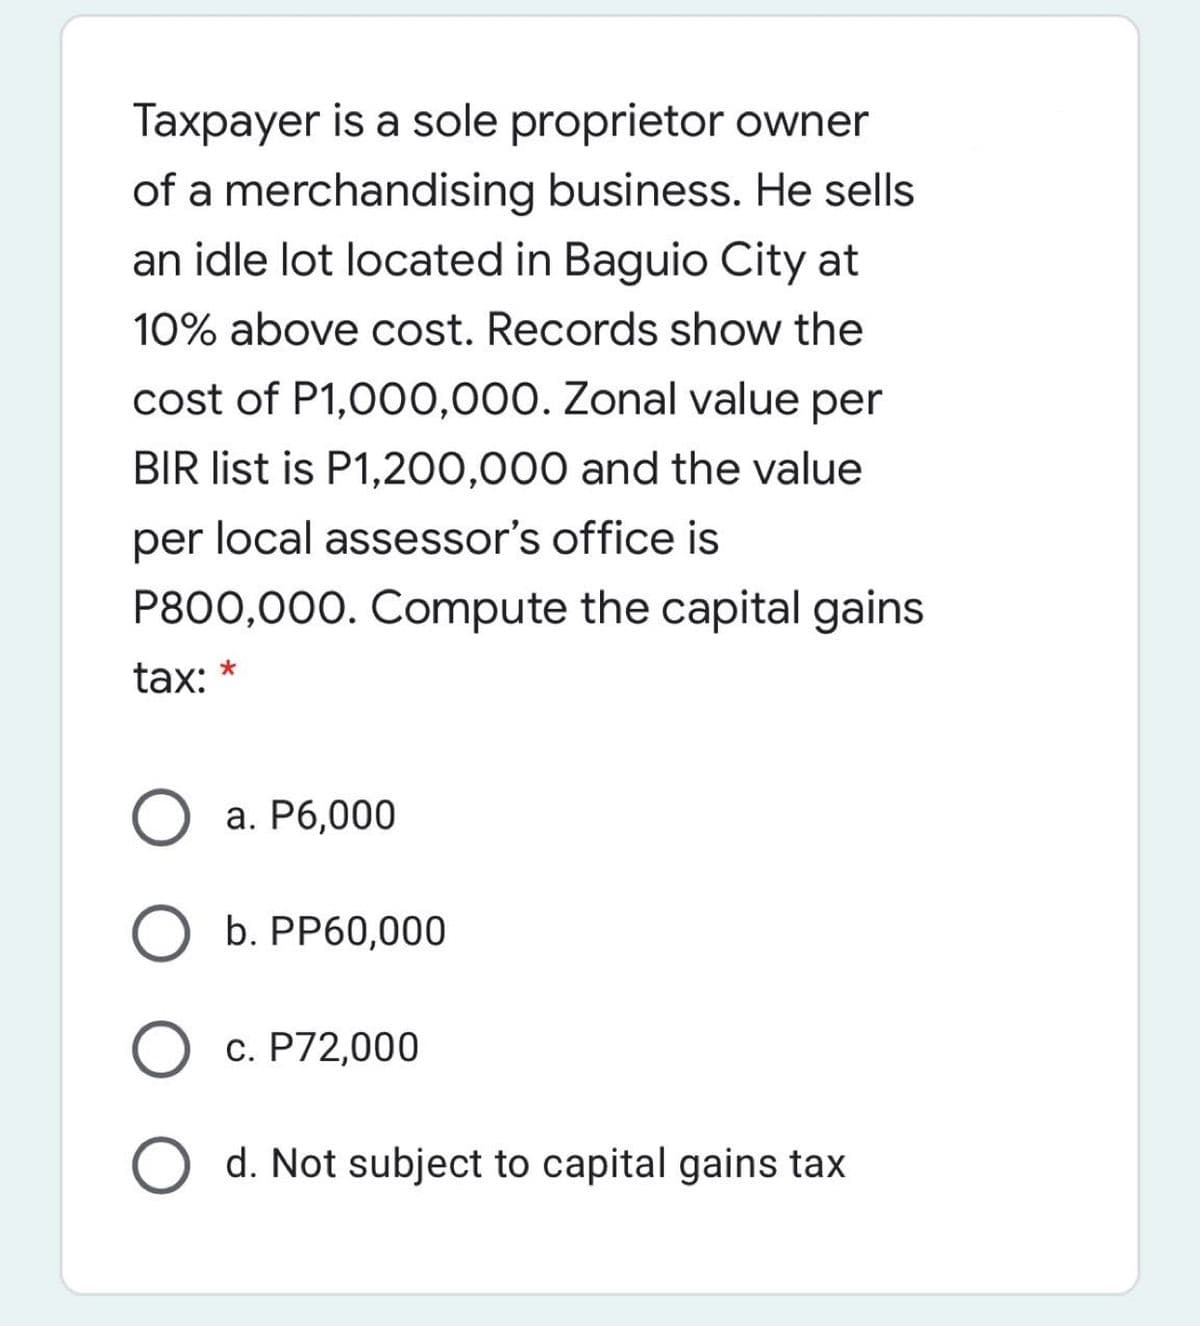 Taxpayer is a sole proprietor owner
of a merchandising business. He sells
an idle lot located in Baguio City at
10% above cost. Records show the
cost of P1,000,000. Zonal value per
BIR list is P1,200,000 and the value
per local assessor's office is
P800,000. Compute the capital gains
tax:
О а. Рб,000
O b. PP60,000
О с. Р72,000
O d. Not subject to capital gains tax
